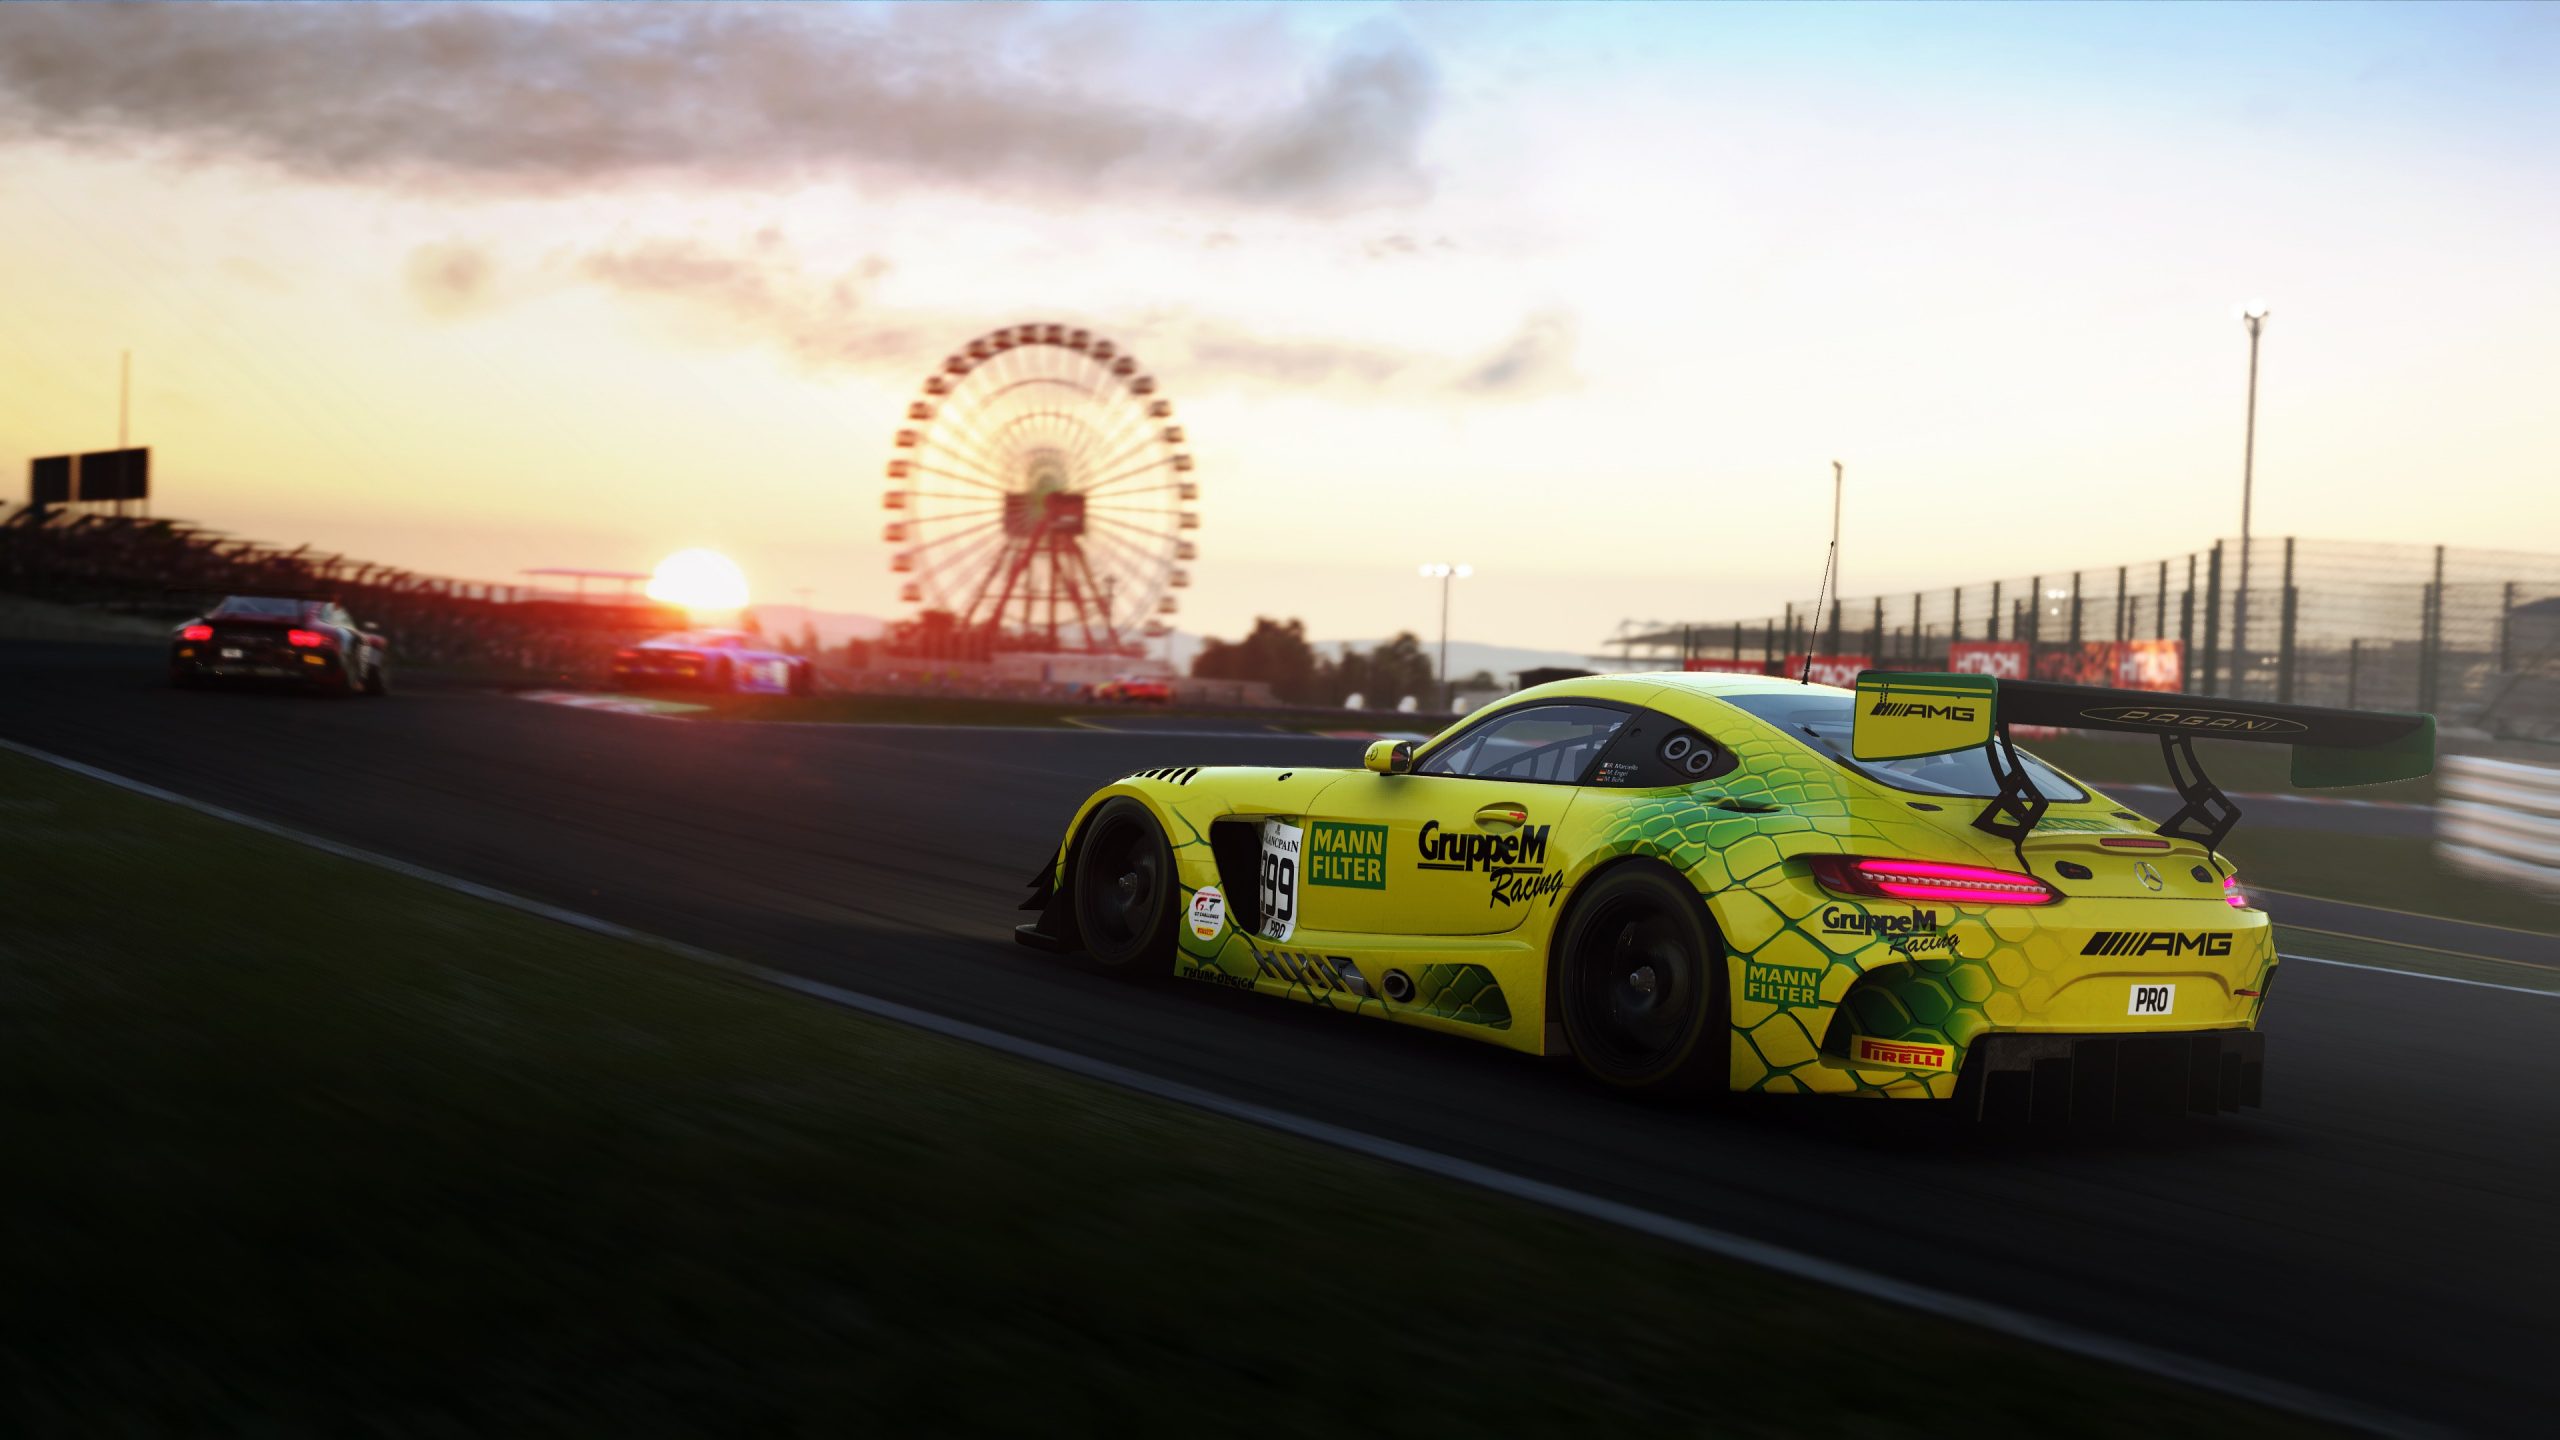 Assetto Corsa Competizione, Game Source Entertainment, PS4, PlayStation 4, racing game, Asia, Southeast Asia, release date, gameplay, features, price, trailer, pre-order